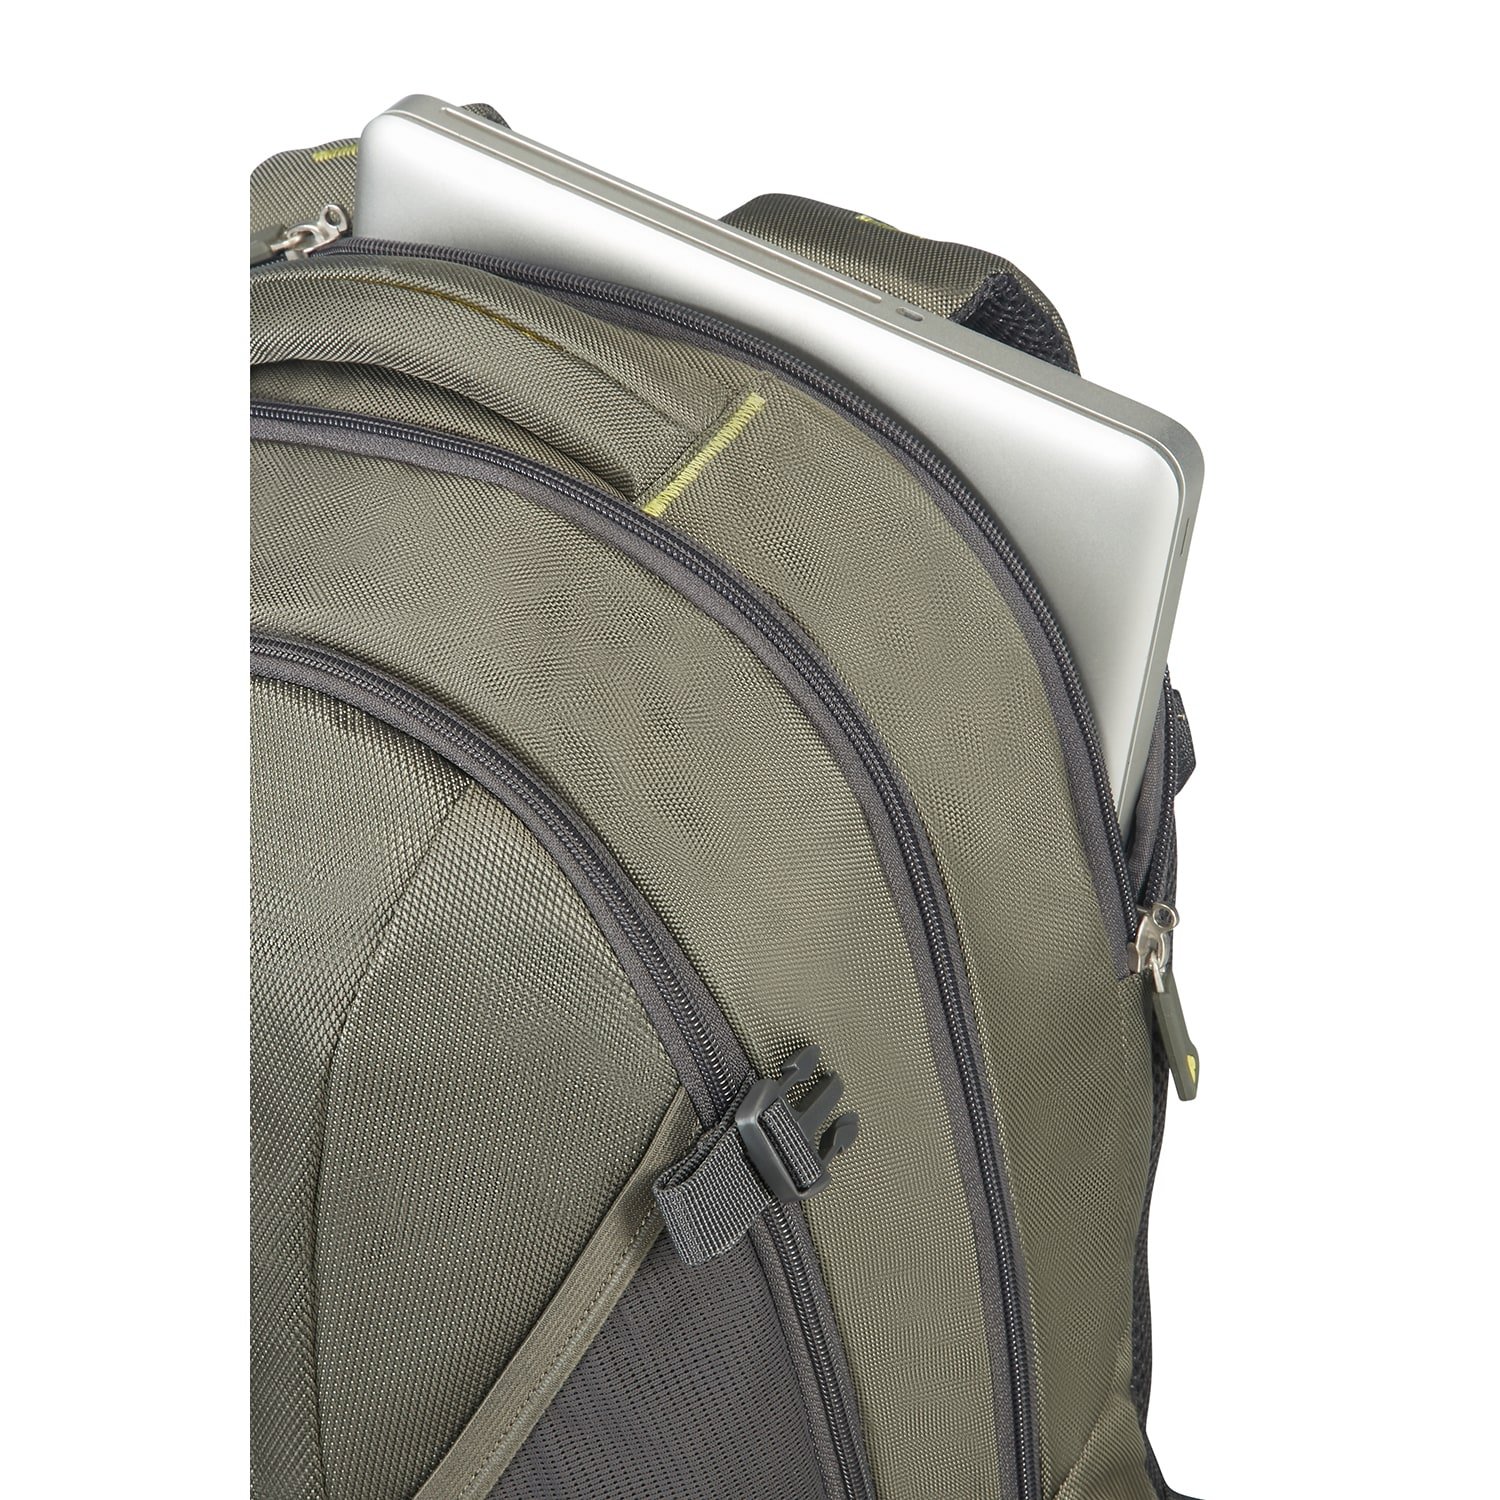 4MATION-LAPTOP BACKPACK M S37N-002-SF000*04